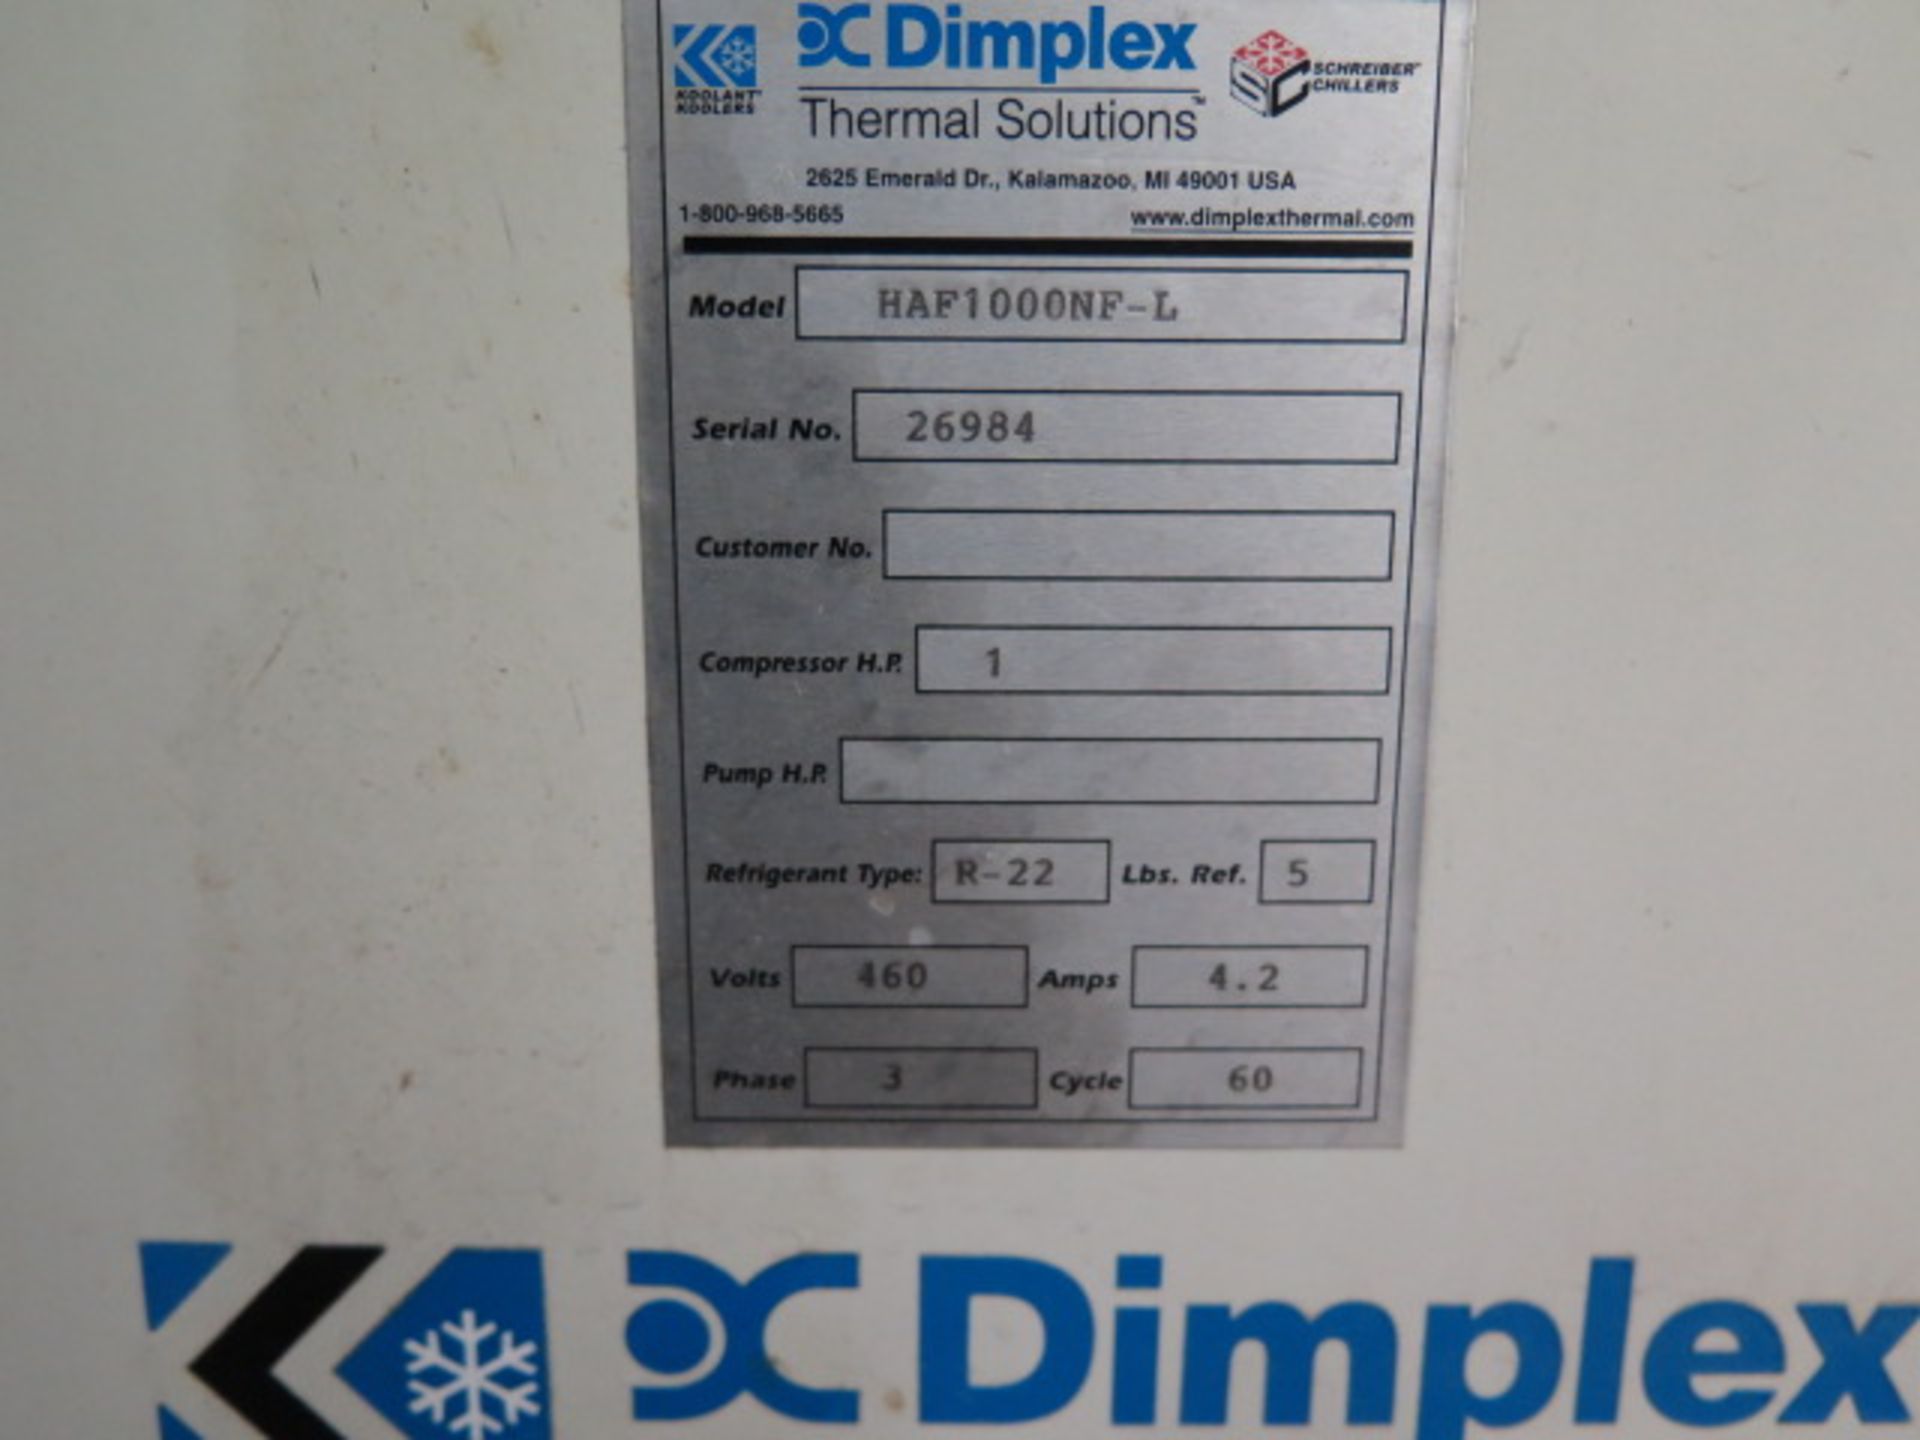 DC Dimplex / Koolant Koolers Chiller Unit (NEW UNIT For Omax WaterJets) (SOLD AS-IS - NO WARRANTY) - Image 6 of 6